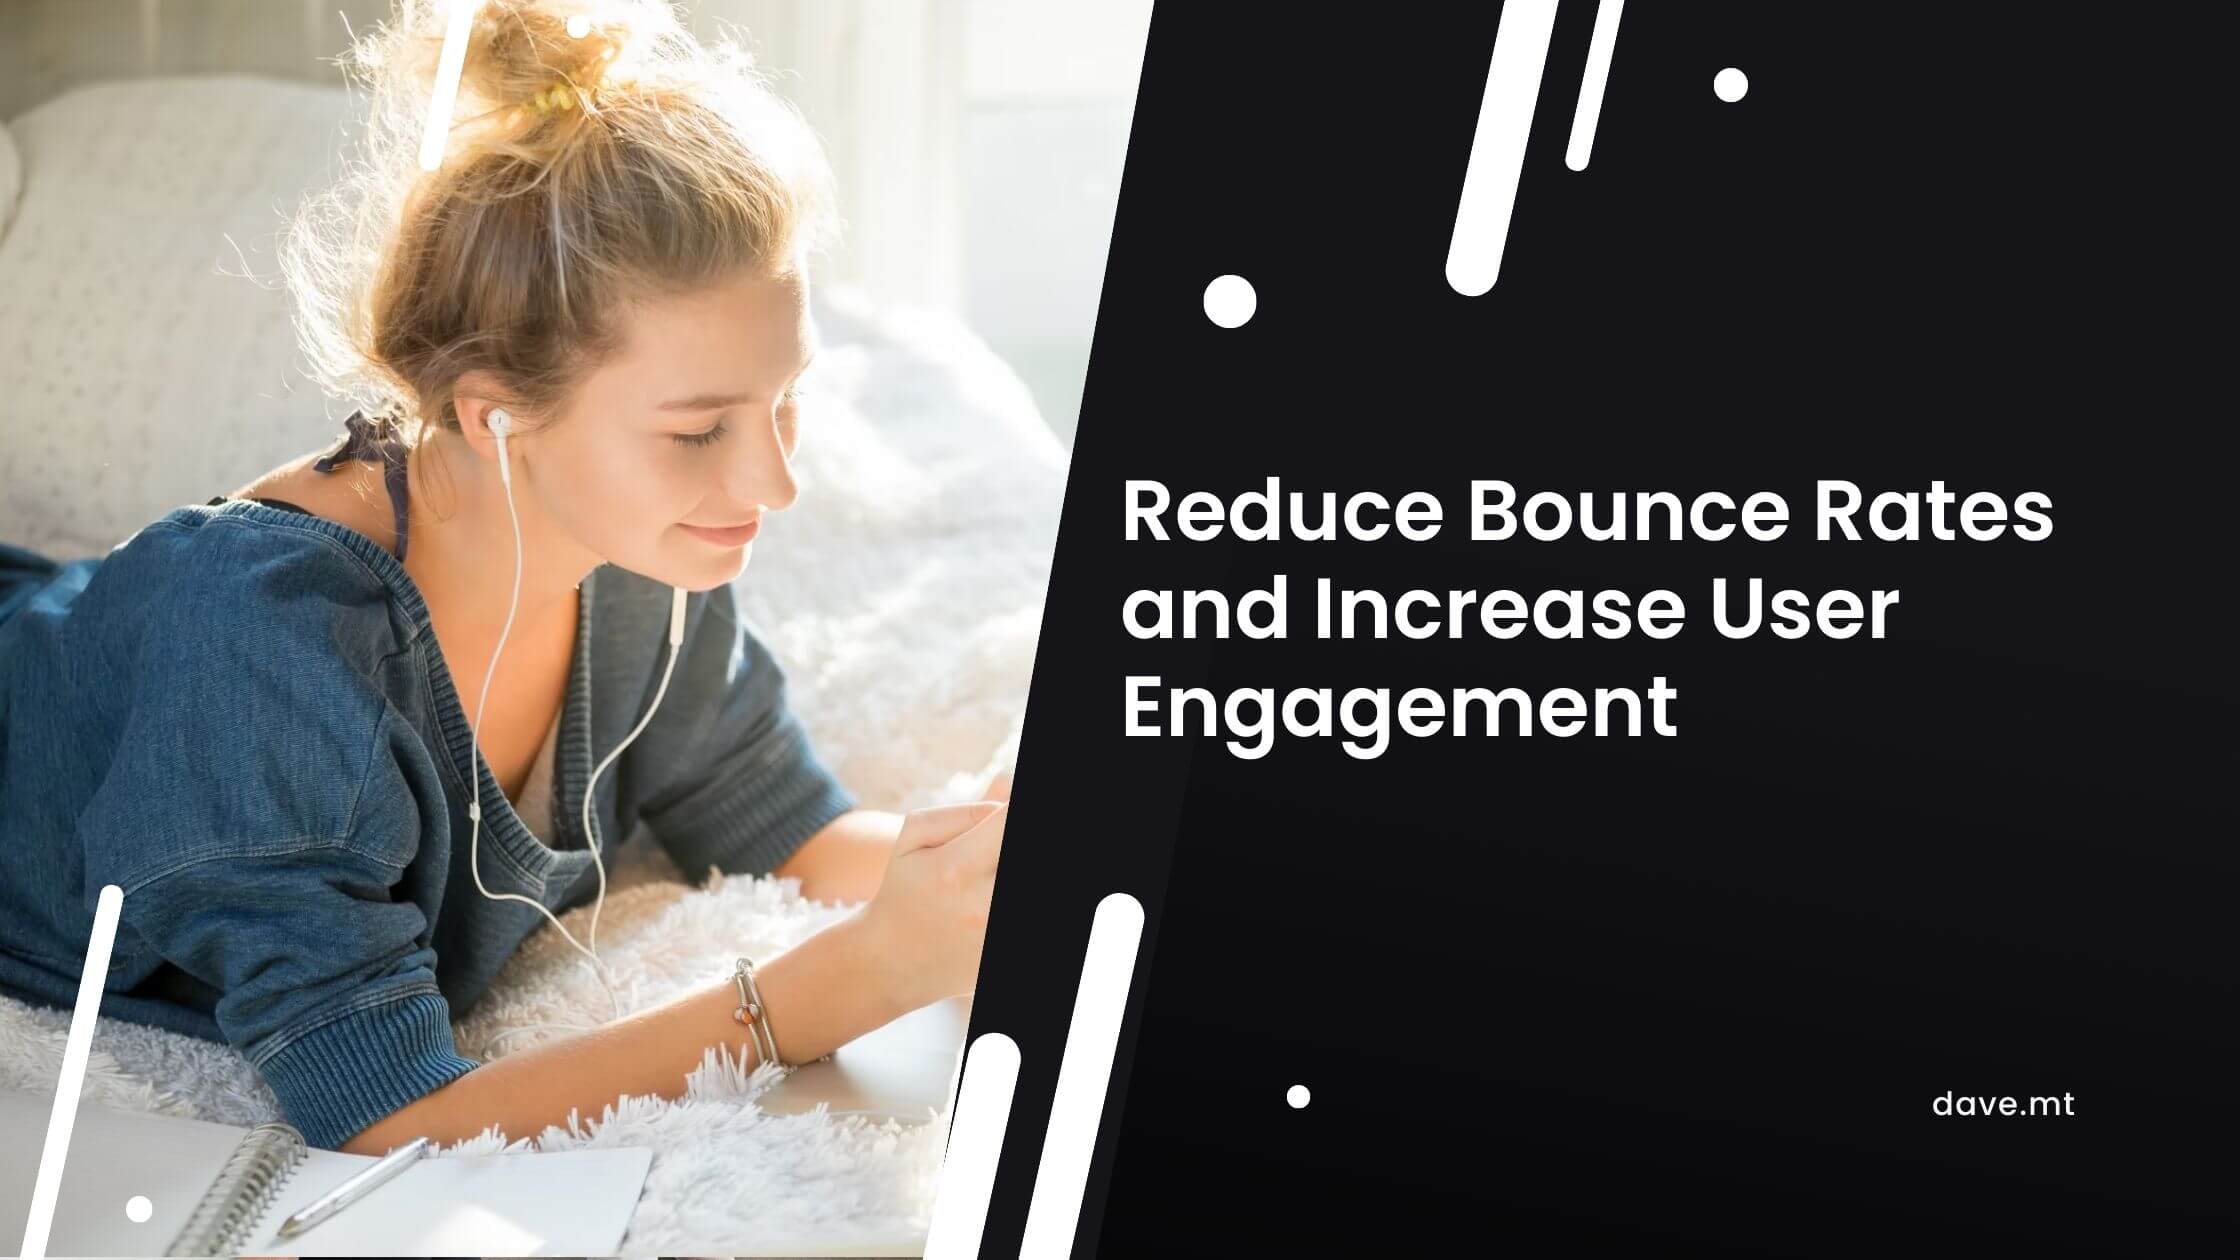 Reduce Bounce Rates and Increase User Engagement on Your Website